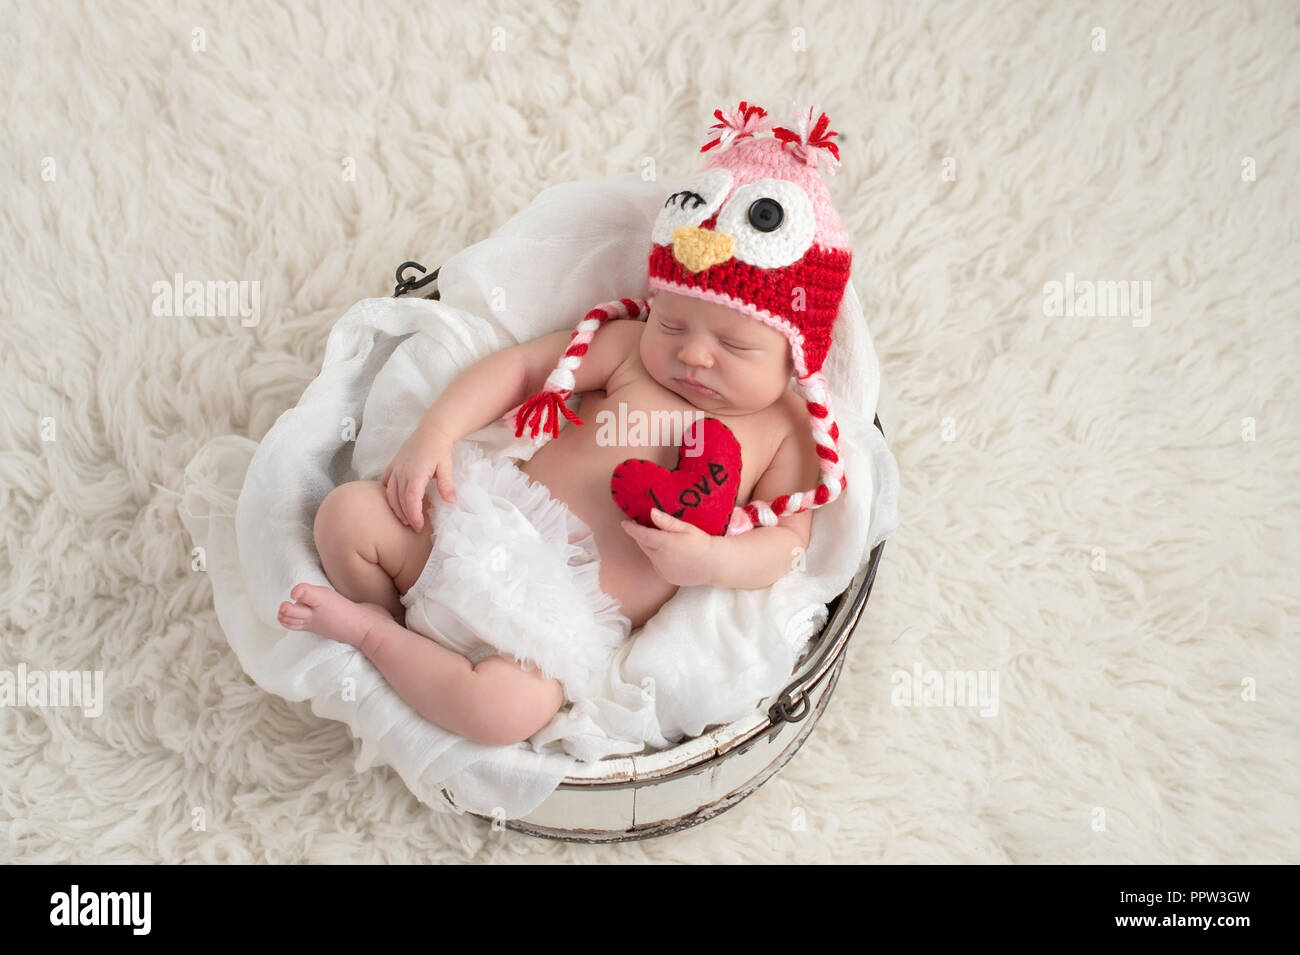 A nine day old, newborn baby girl wearing a pink and red owl hat and holding a heart shaped pillow with the word, 'Love' written on it. Stock Photo